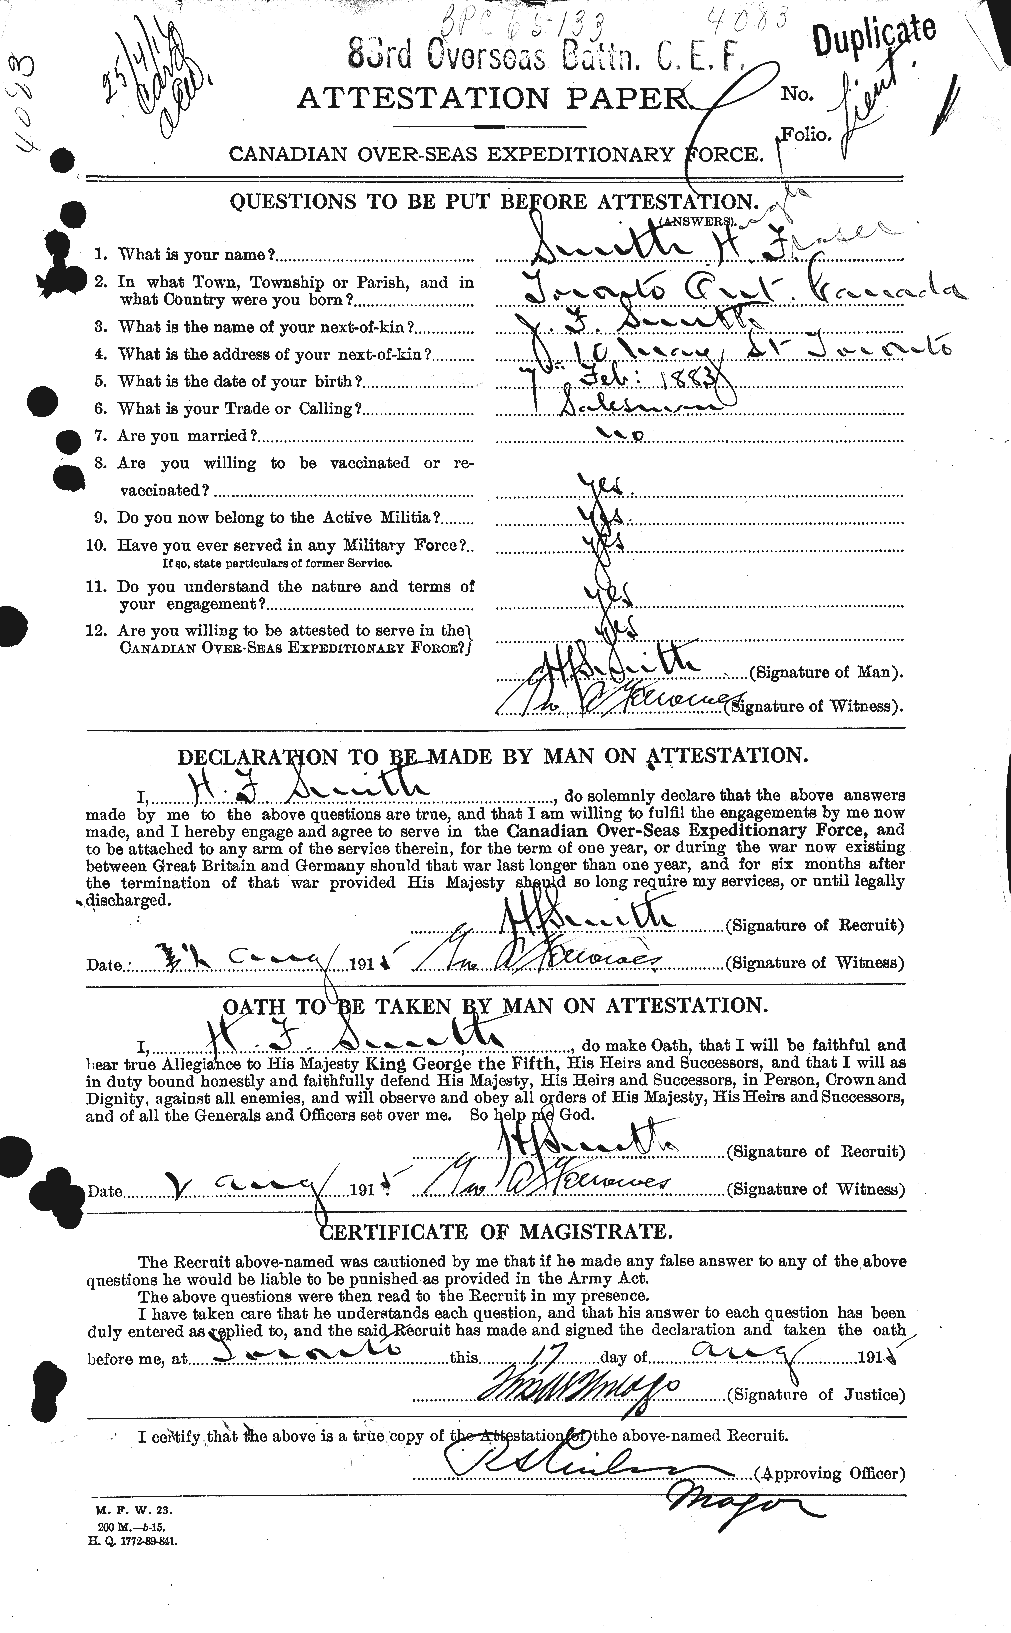 Personnel Records of the First World War - CEF 104245a